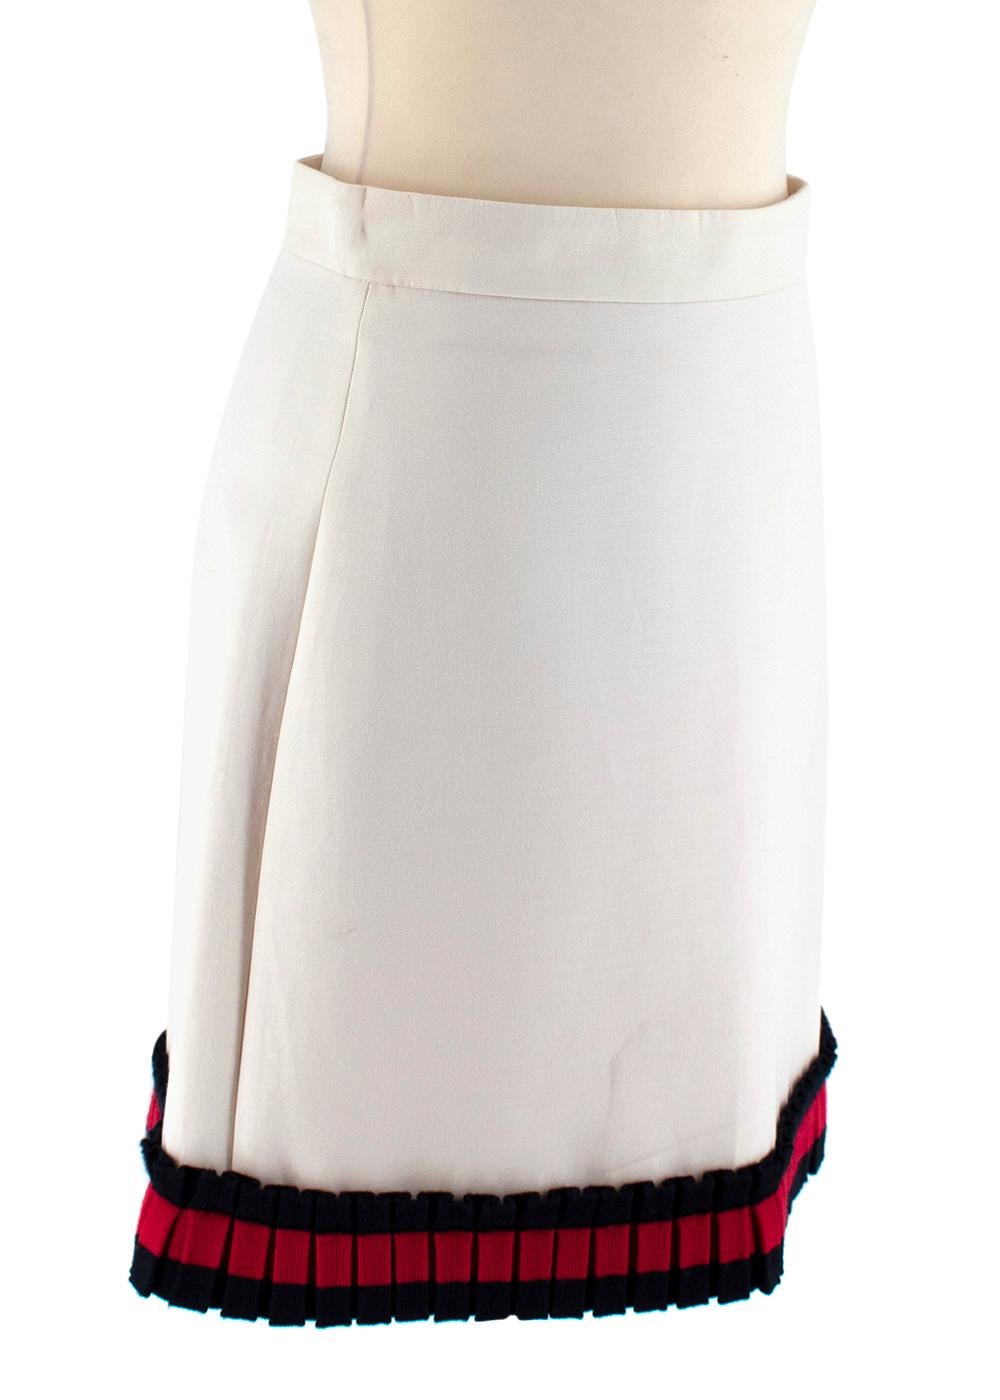 Gucci Cream Mini Skirt

- Silk blend skirt in cream
- Gucci red & blue stripe frill design on the edge
- Above the knee length
- Pink lining
- Zip fastening on the side
- Light weight material

Fabric Composition:
53% Silk
47% Cotton

Made in